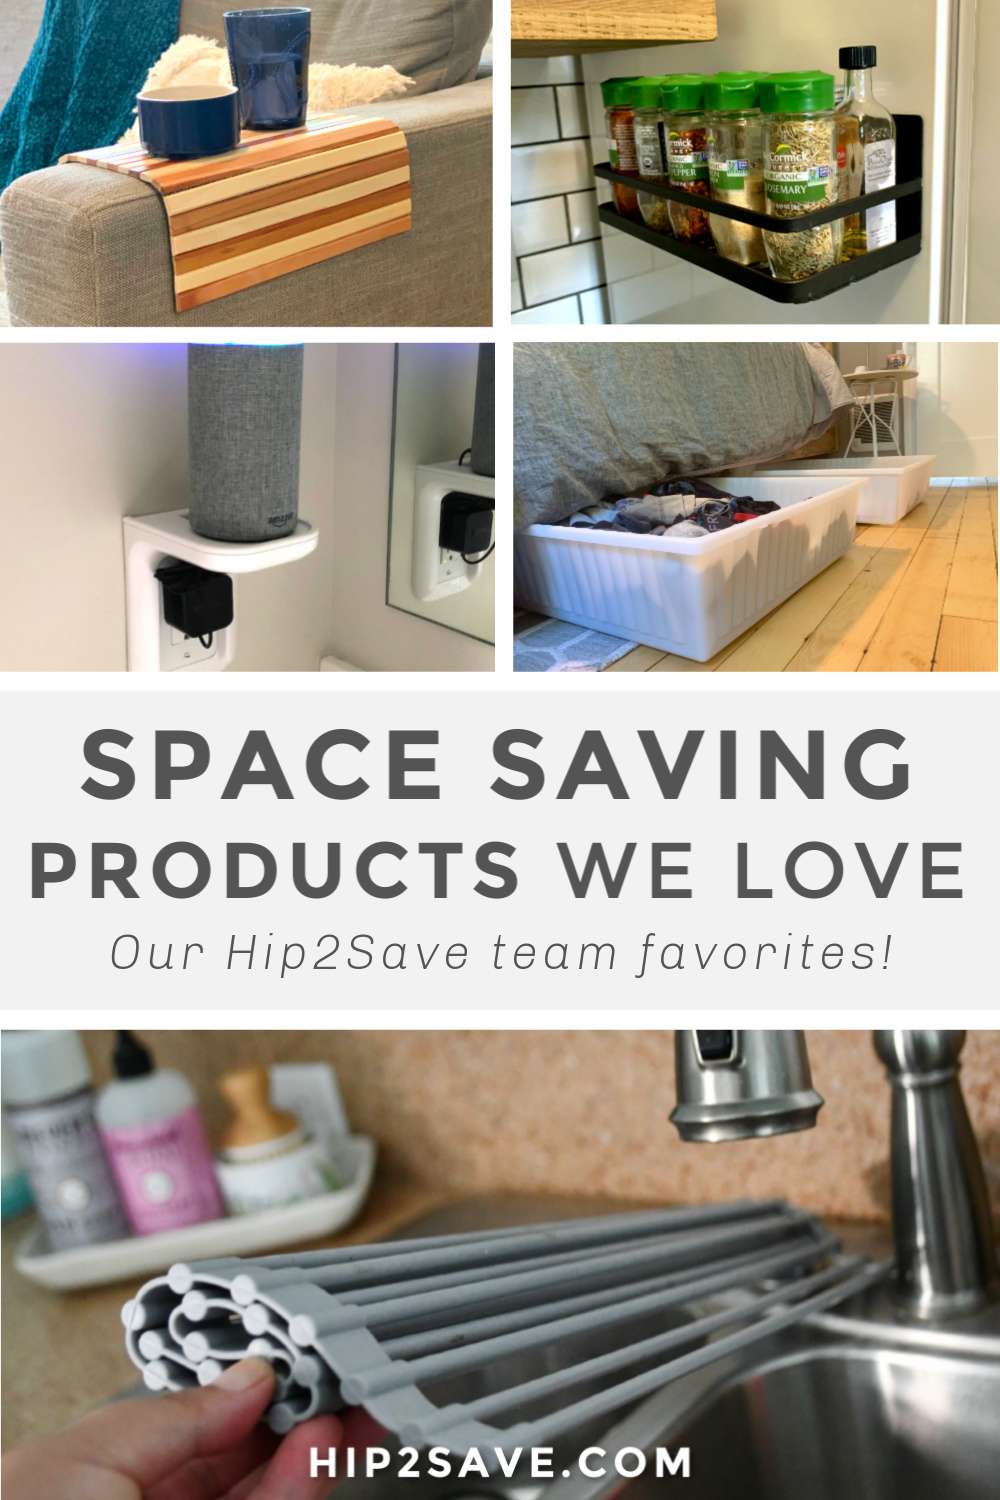 https://hip2save.com/wp-content/uploads/2019/08/space-saving-products-pinterest.jpg?fit=1000%2C1500&strip=all